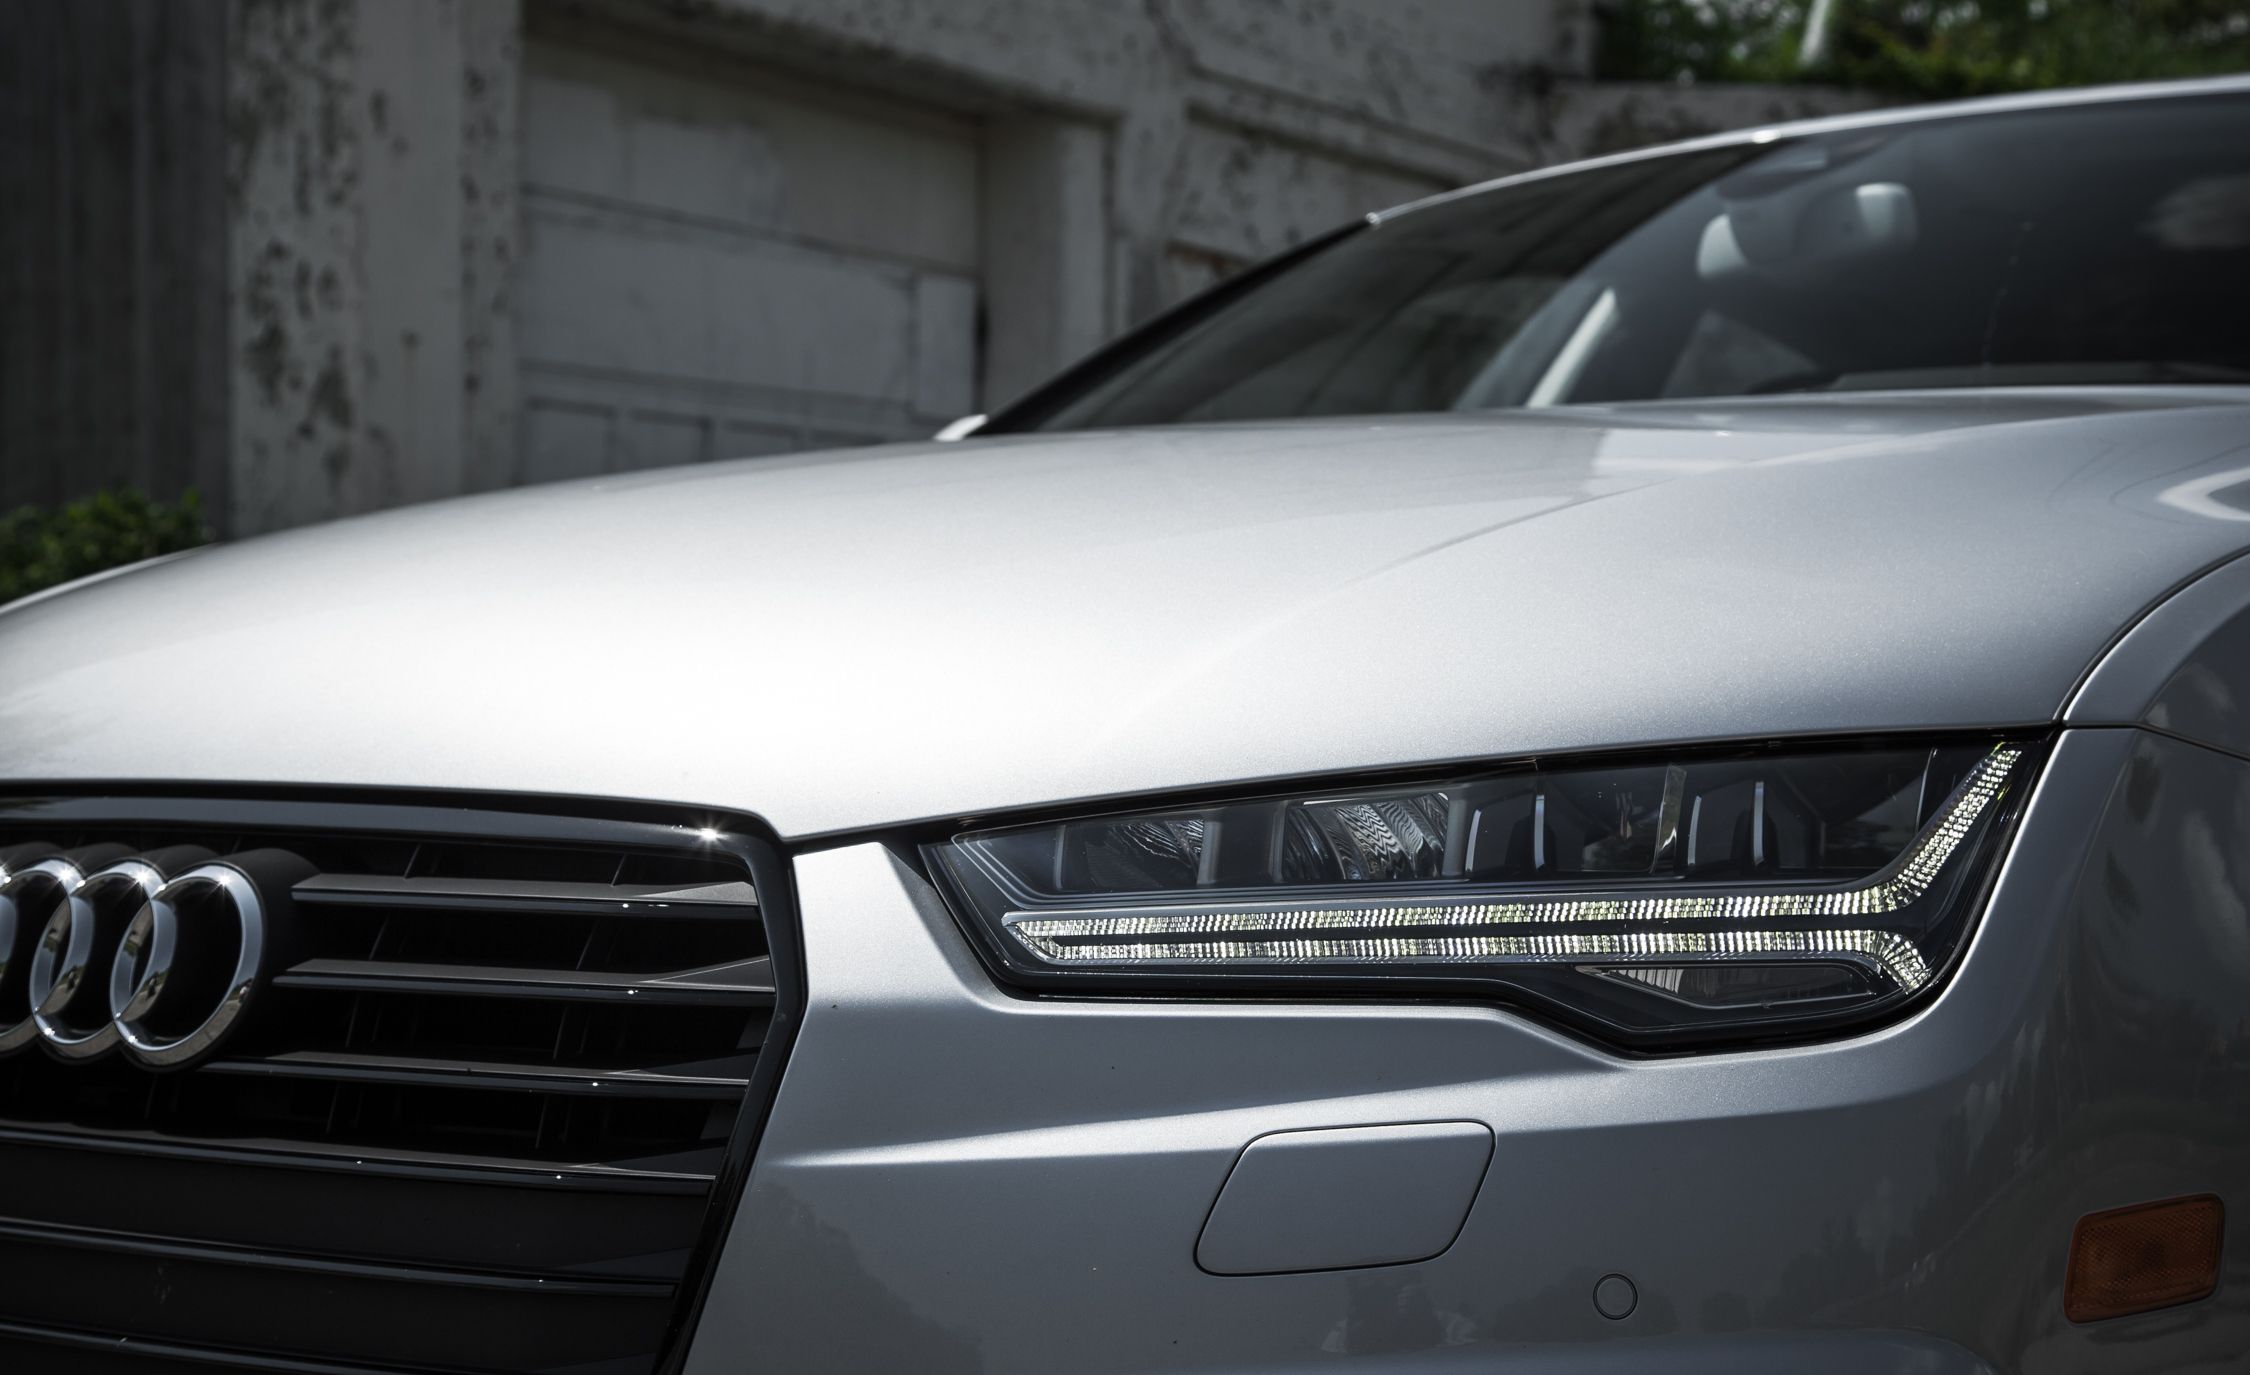 2016 Audi A7 Exterior View Headlight (View 22 of 26)